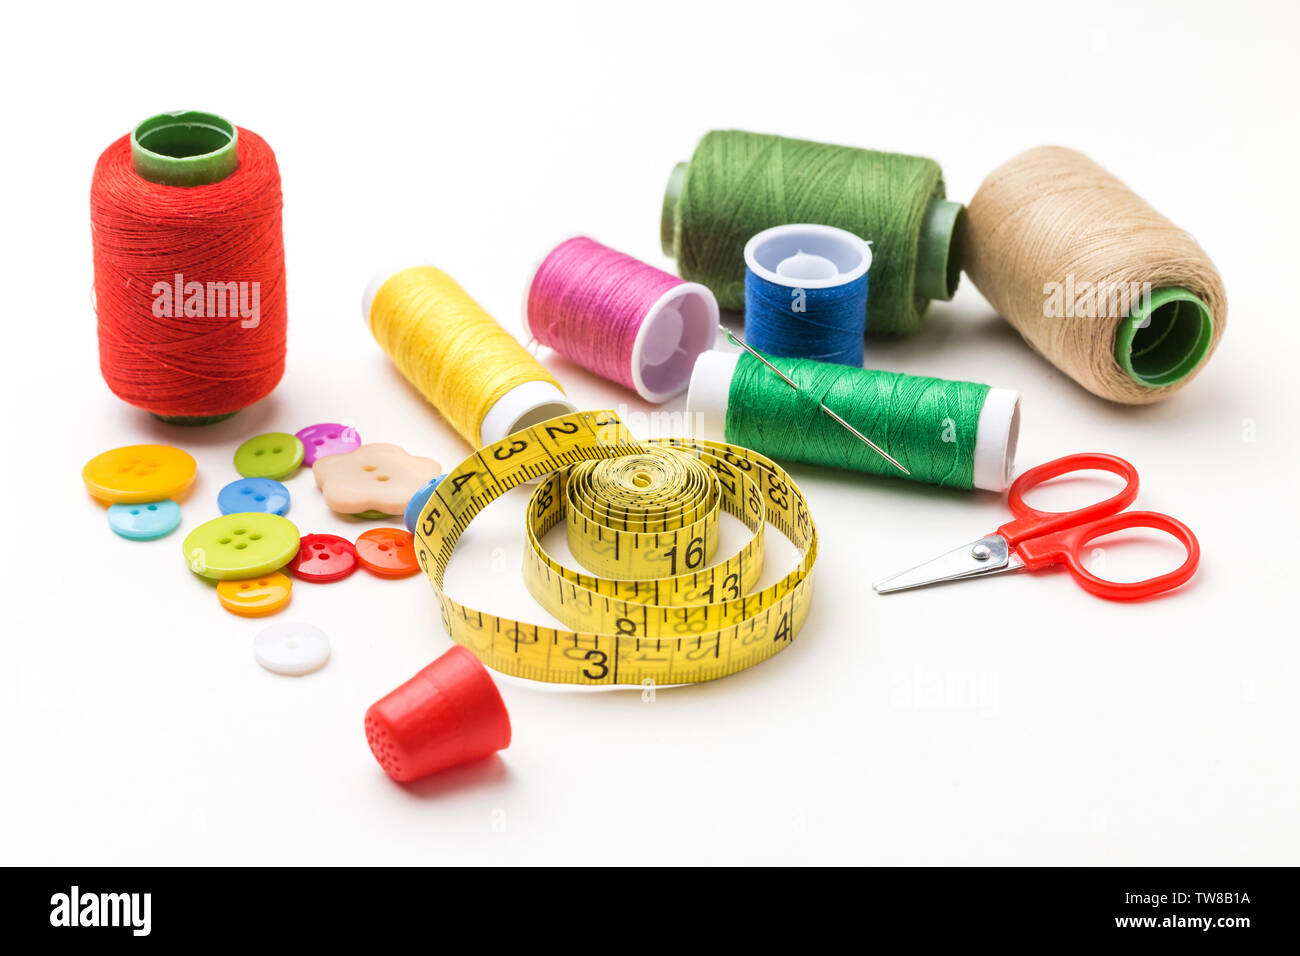 Fine threads Cut Out Stock Images & Pictures - Alamy